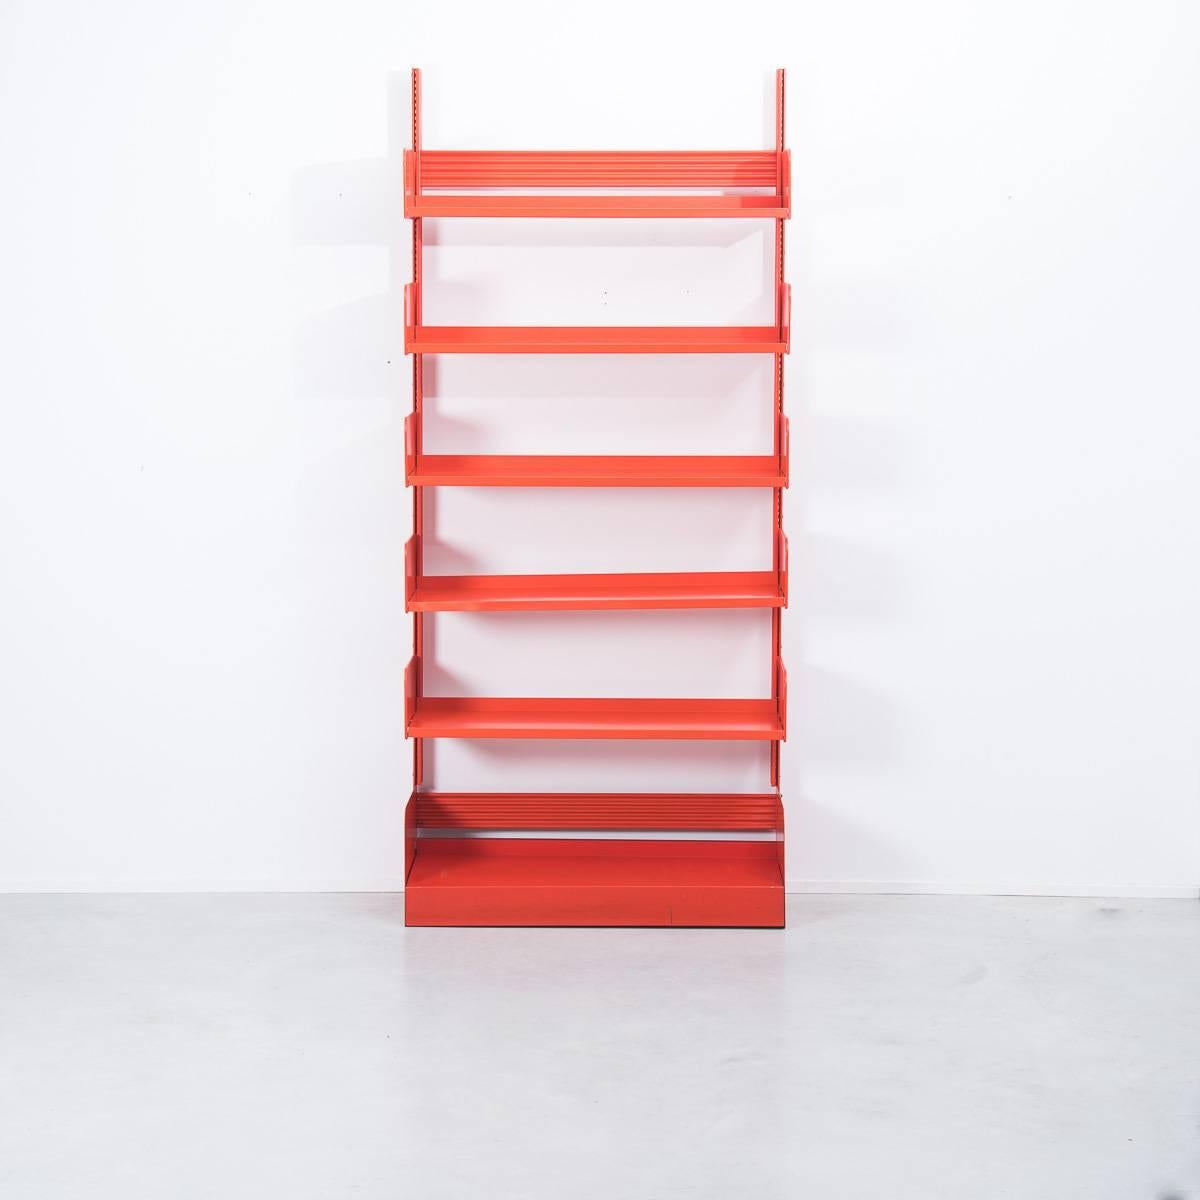 The ‘Congresso’ shelf was originally manufactured by Lips Vago, a small design company that led modularity, elegance and style in functional design.
The Congresso shelf was originally designed as a library shelving system. It is made from steel